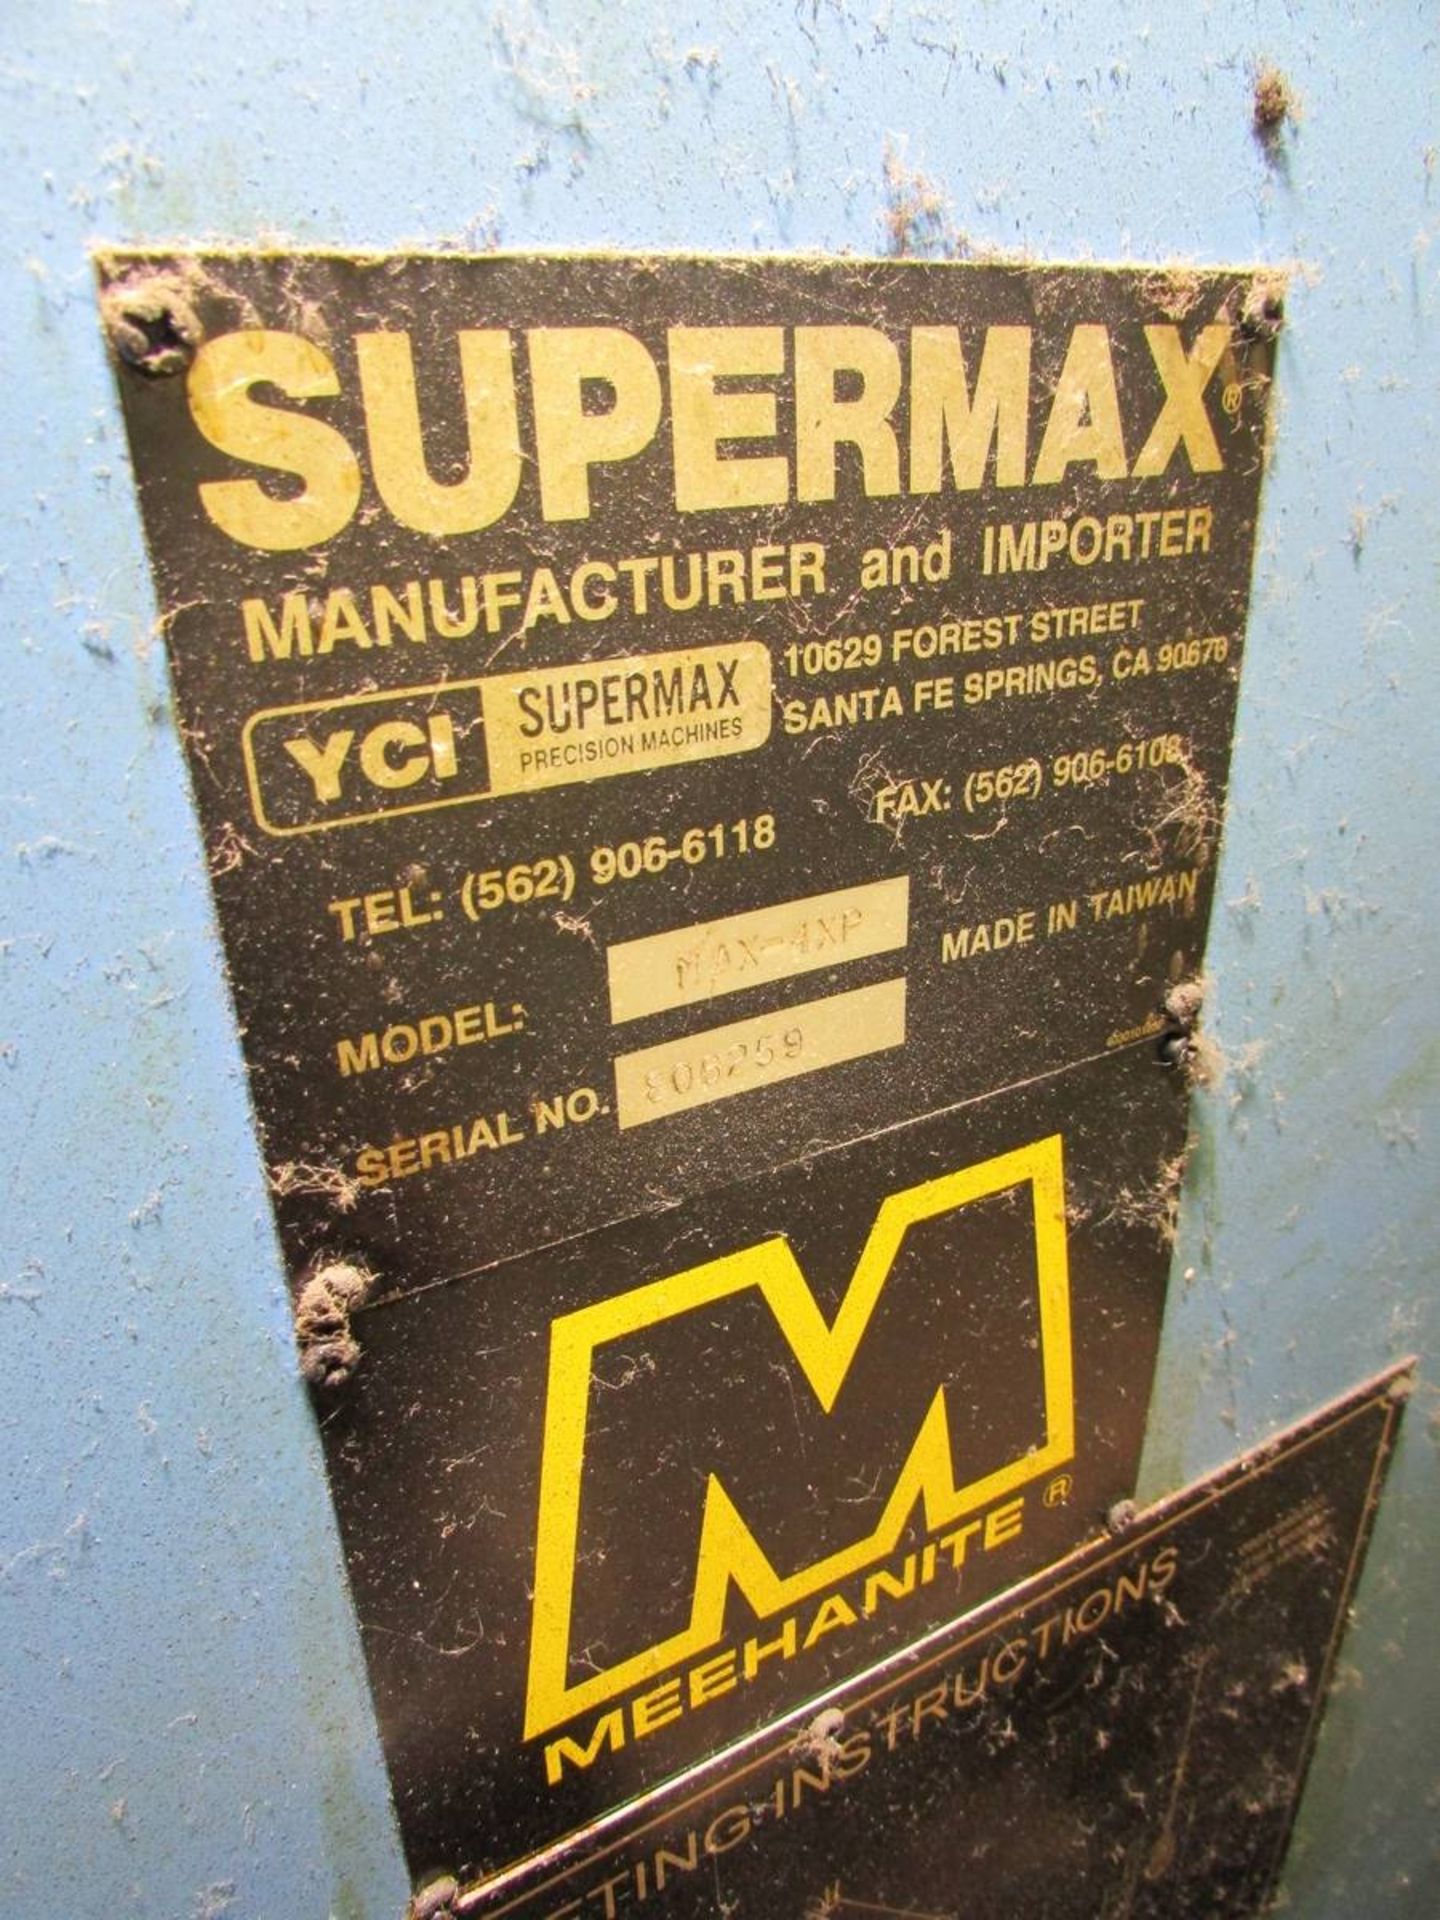 Supermax MAX-4XP 3-Axis CNC Vertical Milling Machine - Image 15 of 21